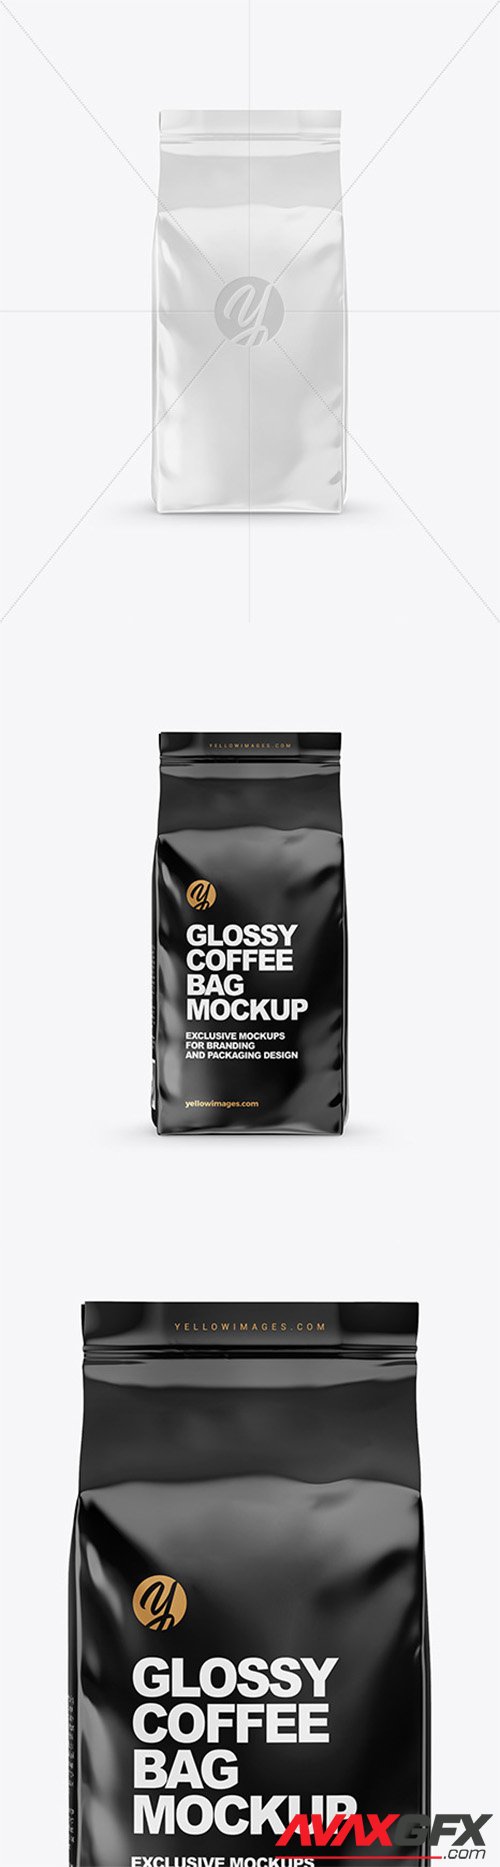 Download Glossy Coffee Bag Mockup 61229 Avaxgfx All Downloads That You Need In One Place Graphic From Nitroflare Rapidgator Yellowimages Mockups